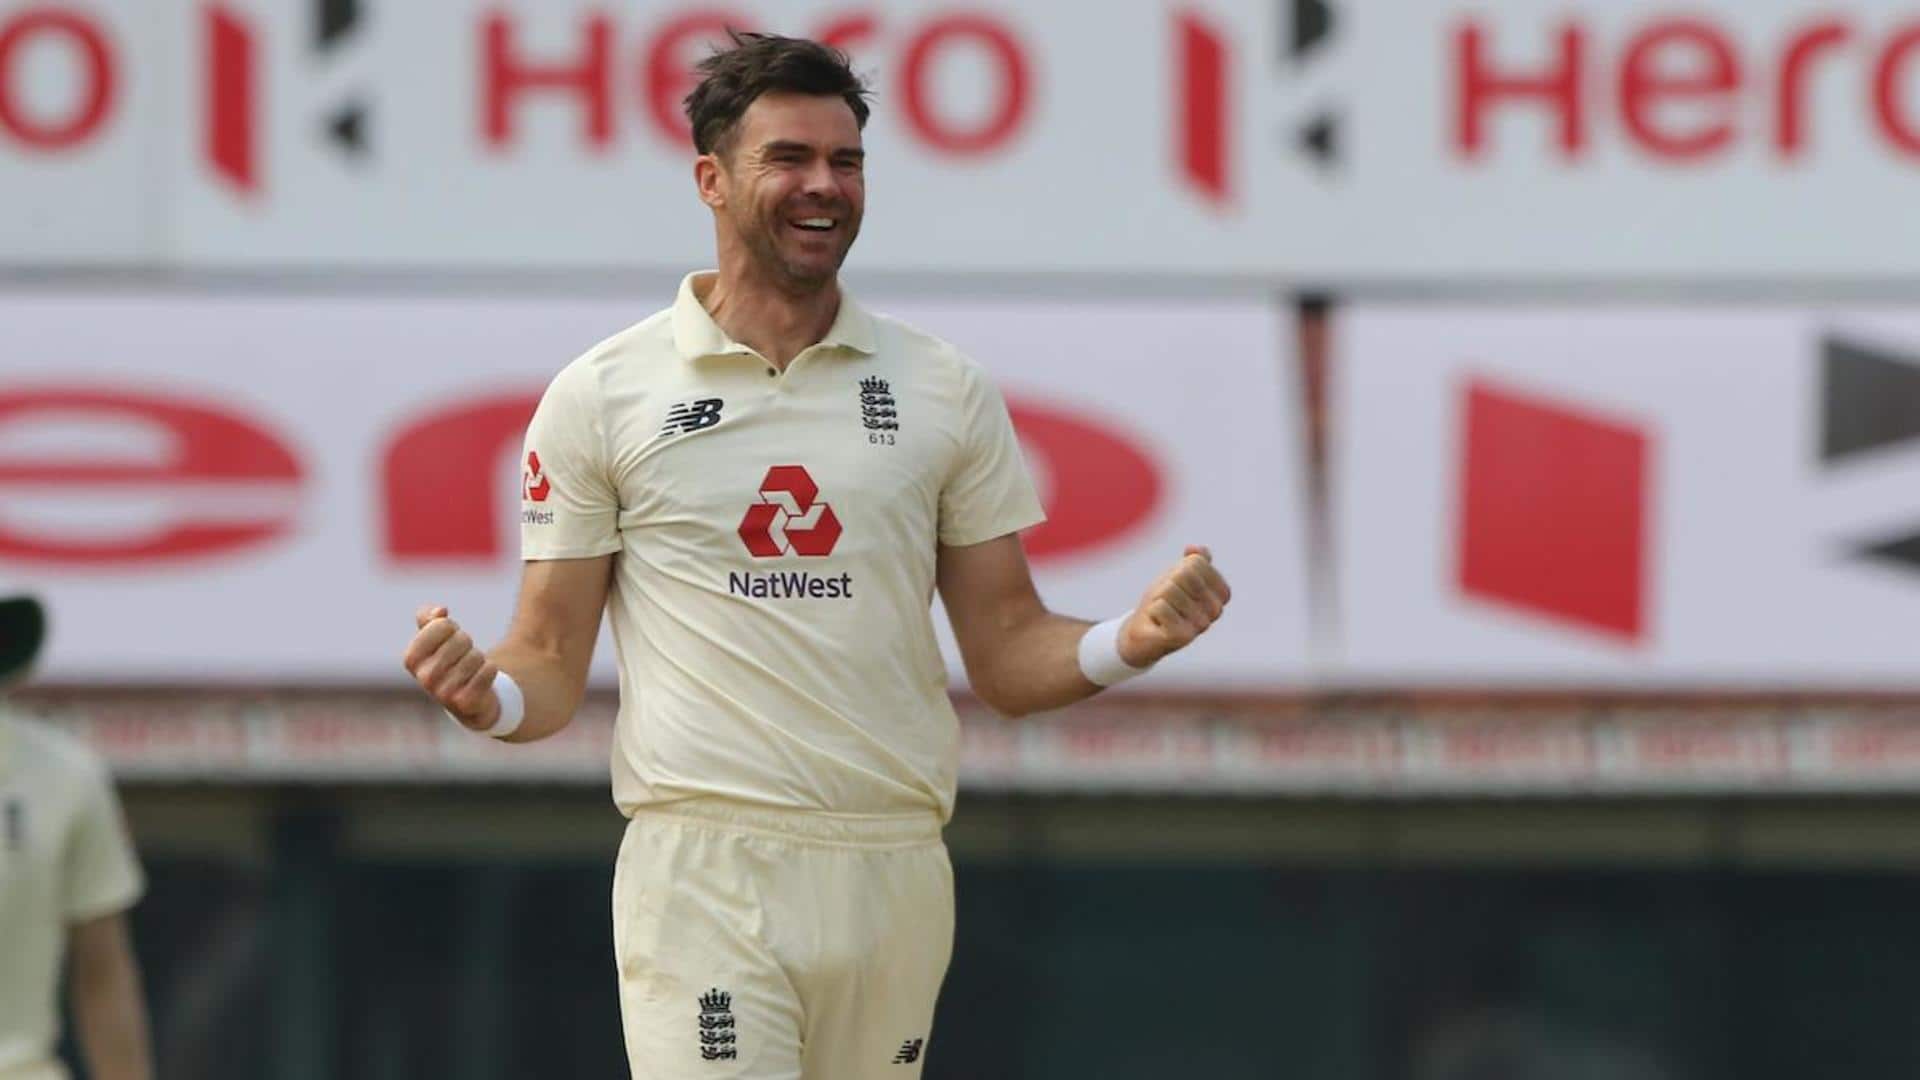 James Anderson vs Steve Smith in Ashes: Decoding the stats